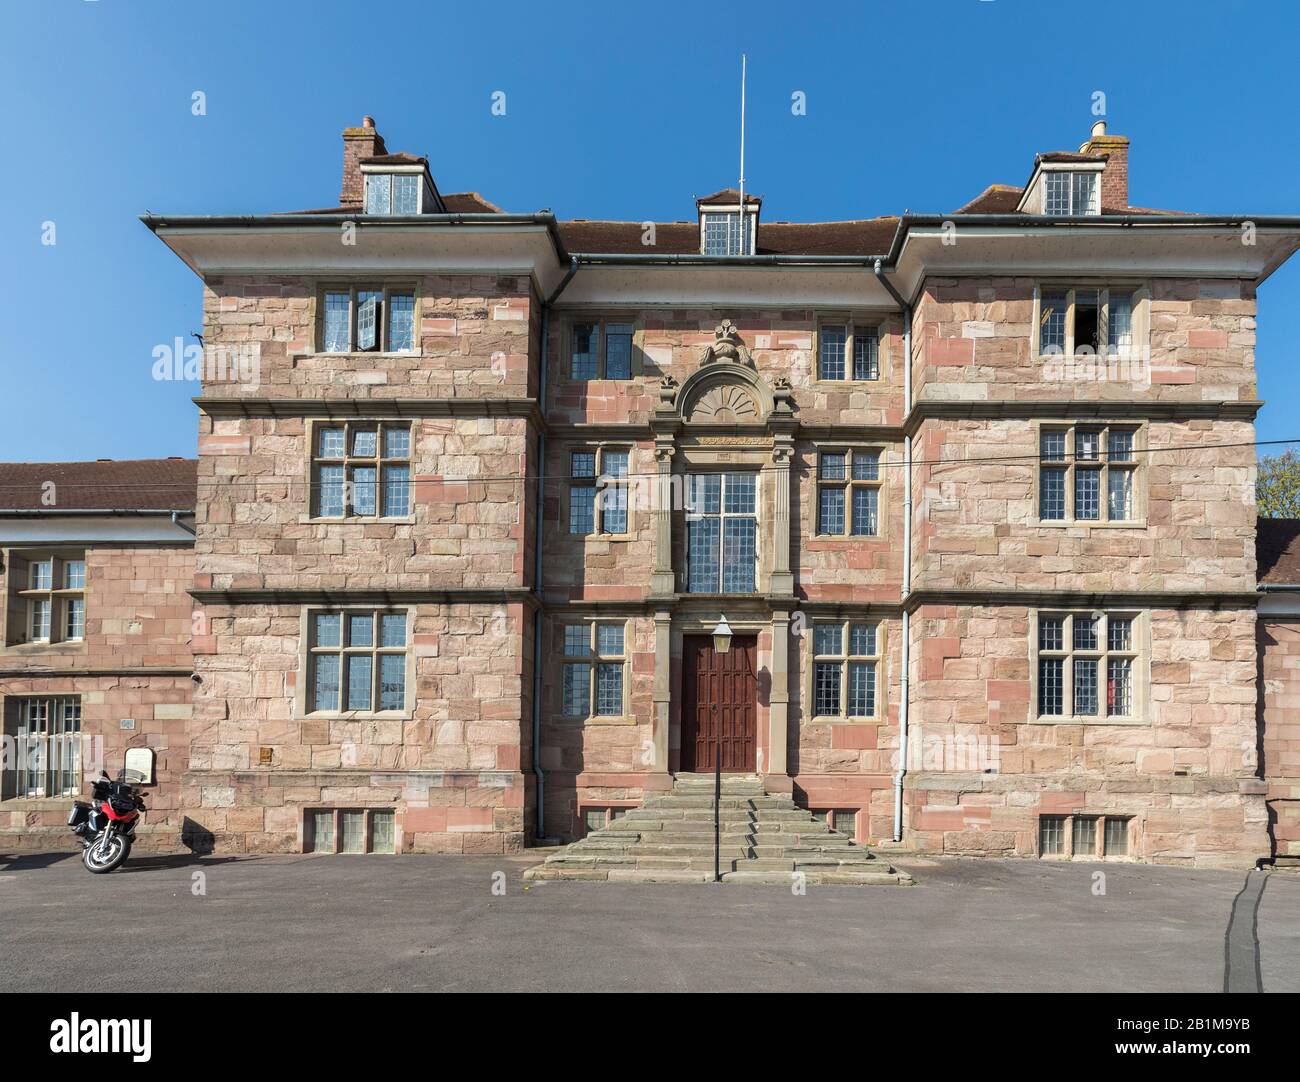 Great Castle House at Monmouth Regiment barracks, Monmouth, Wales, UK Stock Photo